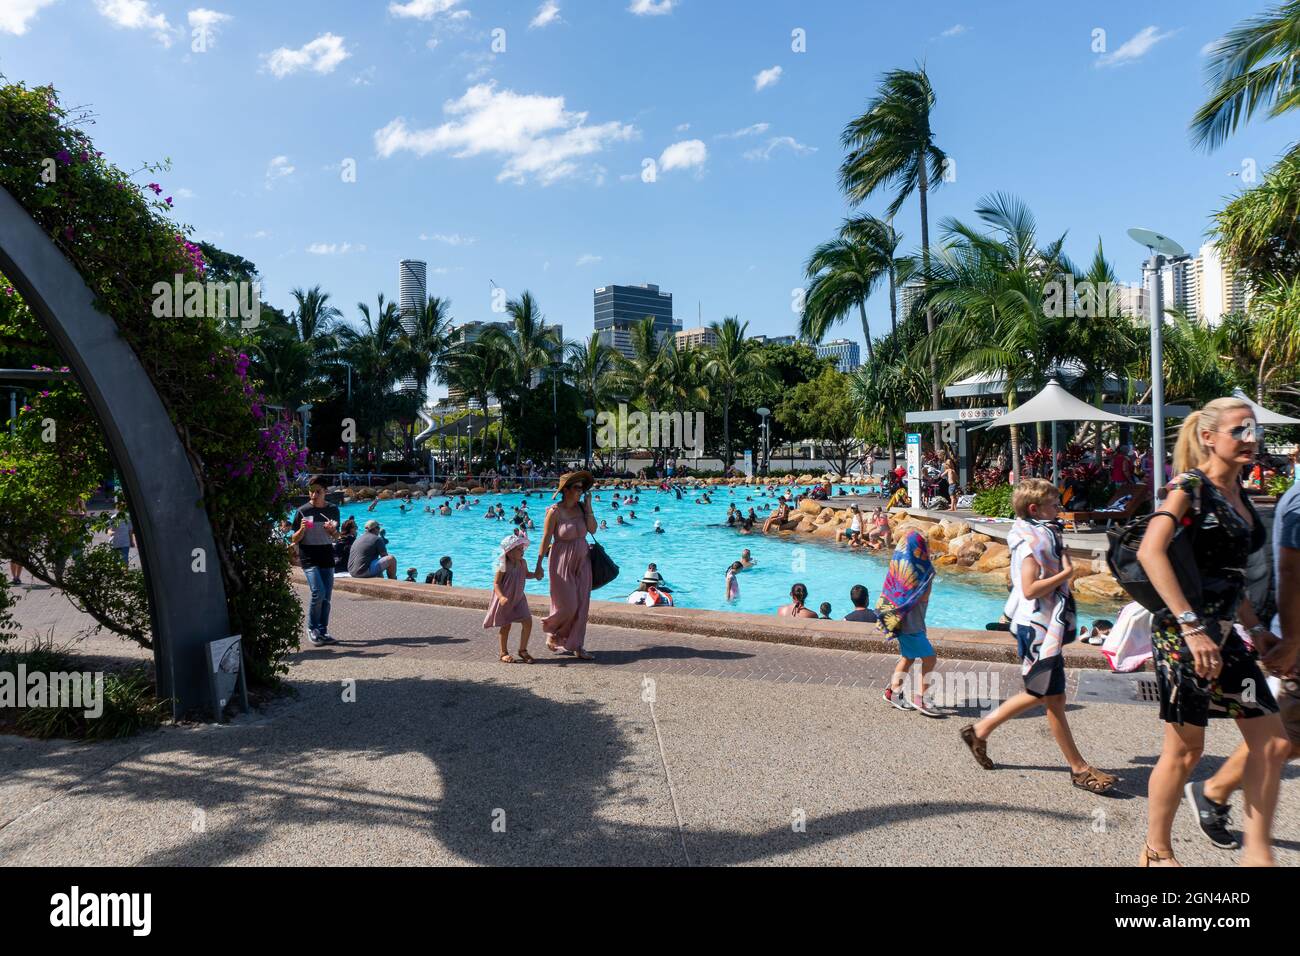 BRISBANE, AUSTRALIA - Aug 10, 2021: A breathtaking view of Brisbane downtown. People are enjoying summer and good weather on the street. Stock Photo